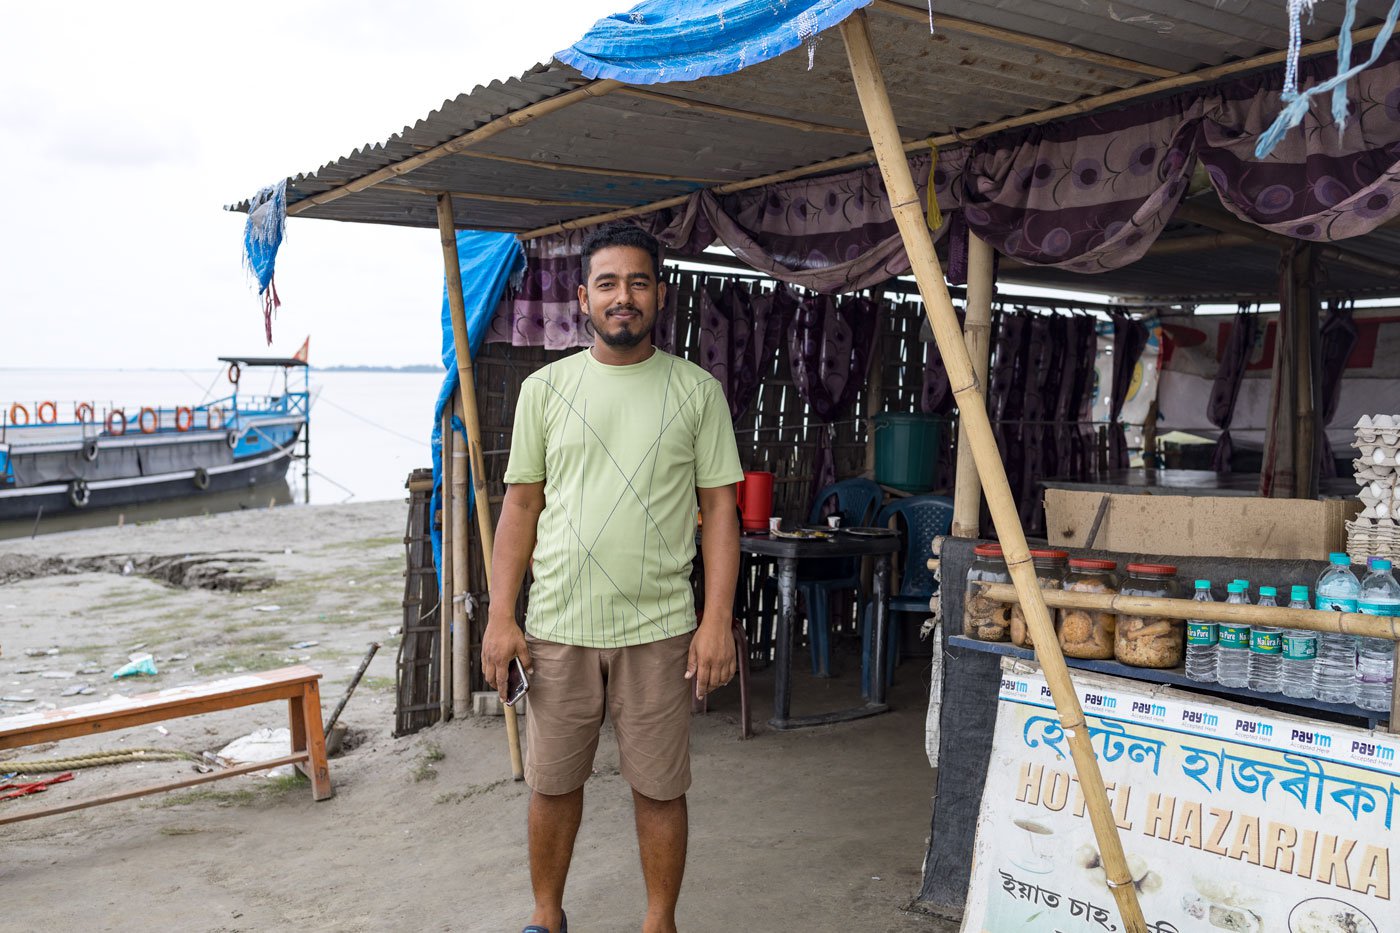 Mukta, a Sociology graduate, set up his riverside eatery six years ago after the much-desired government job continued to elude him